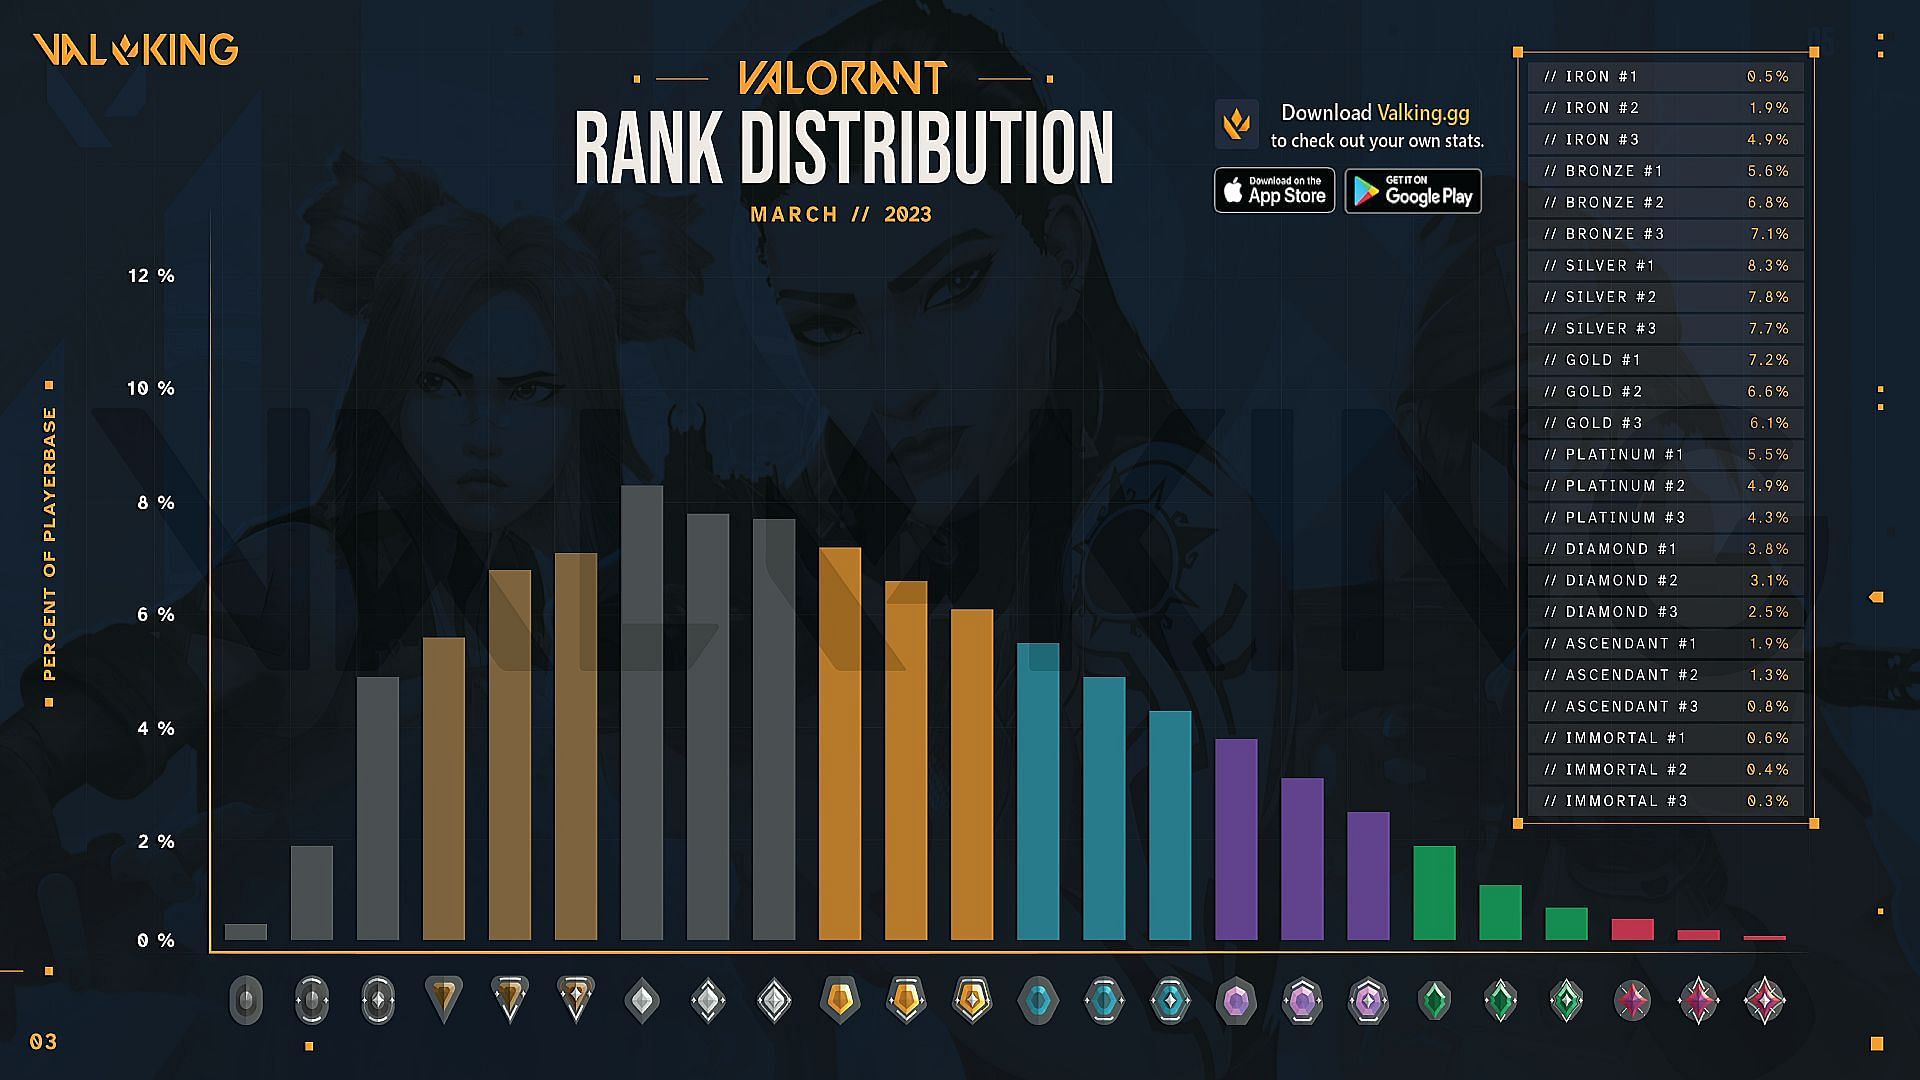 What is Valorant's rank distribution as of March 2023?